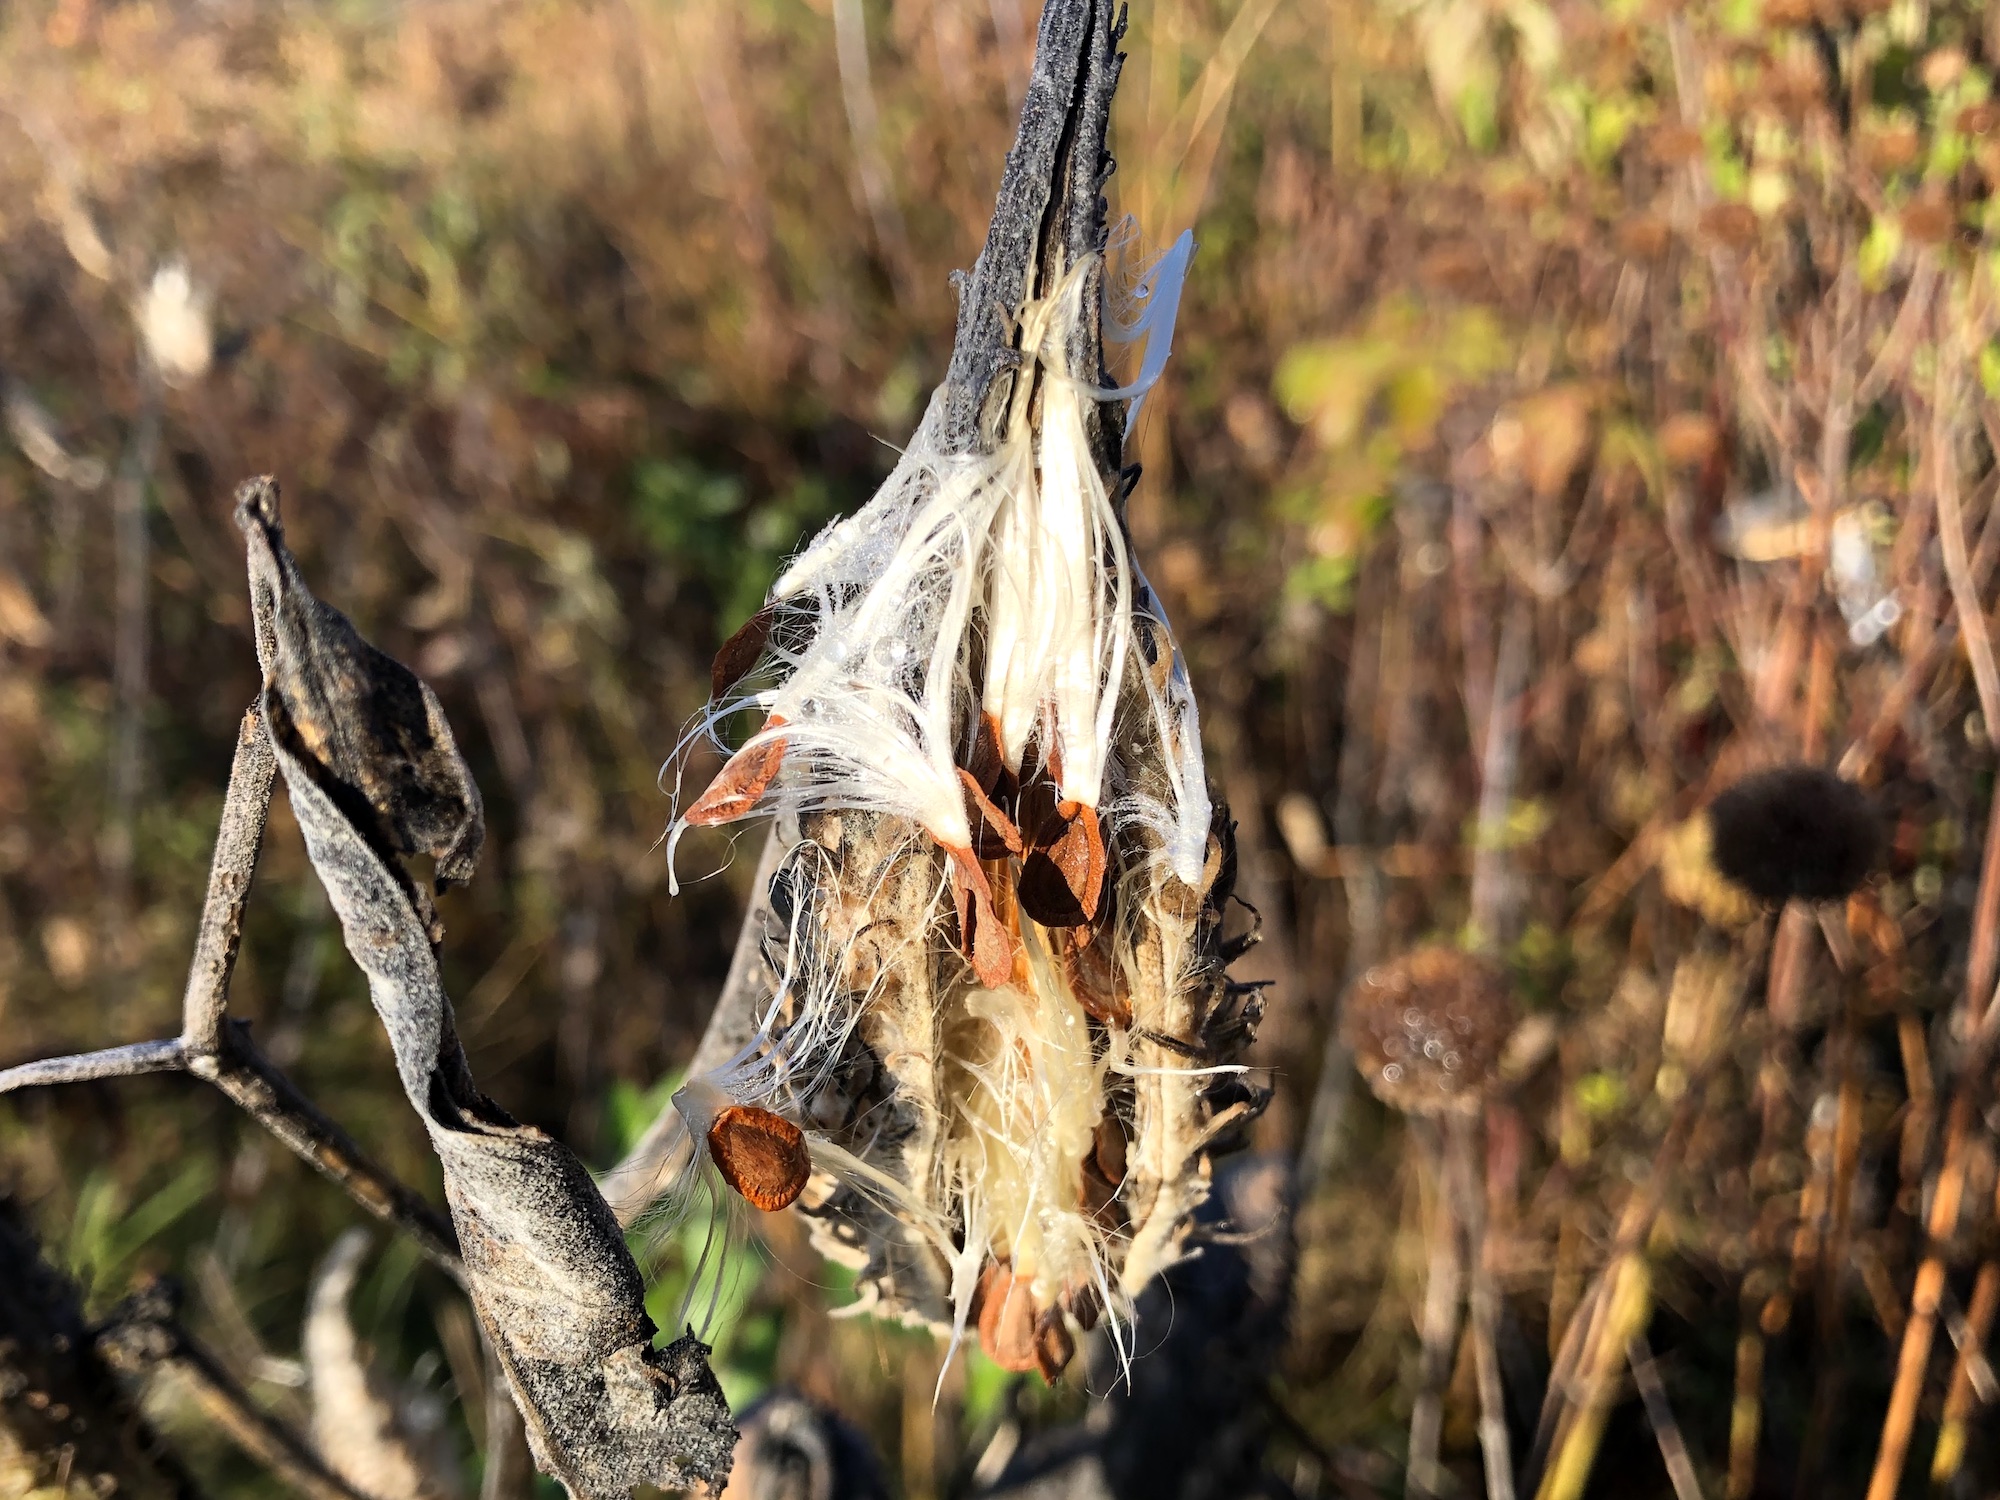 Common Milkweed on shore of Marion Dunn Pond on October 27, 2019.